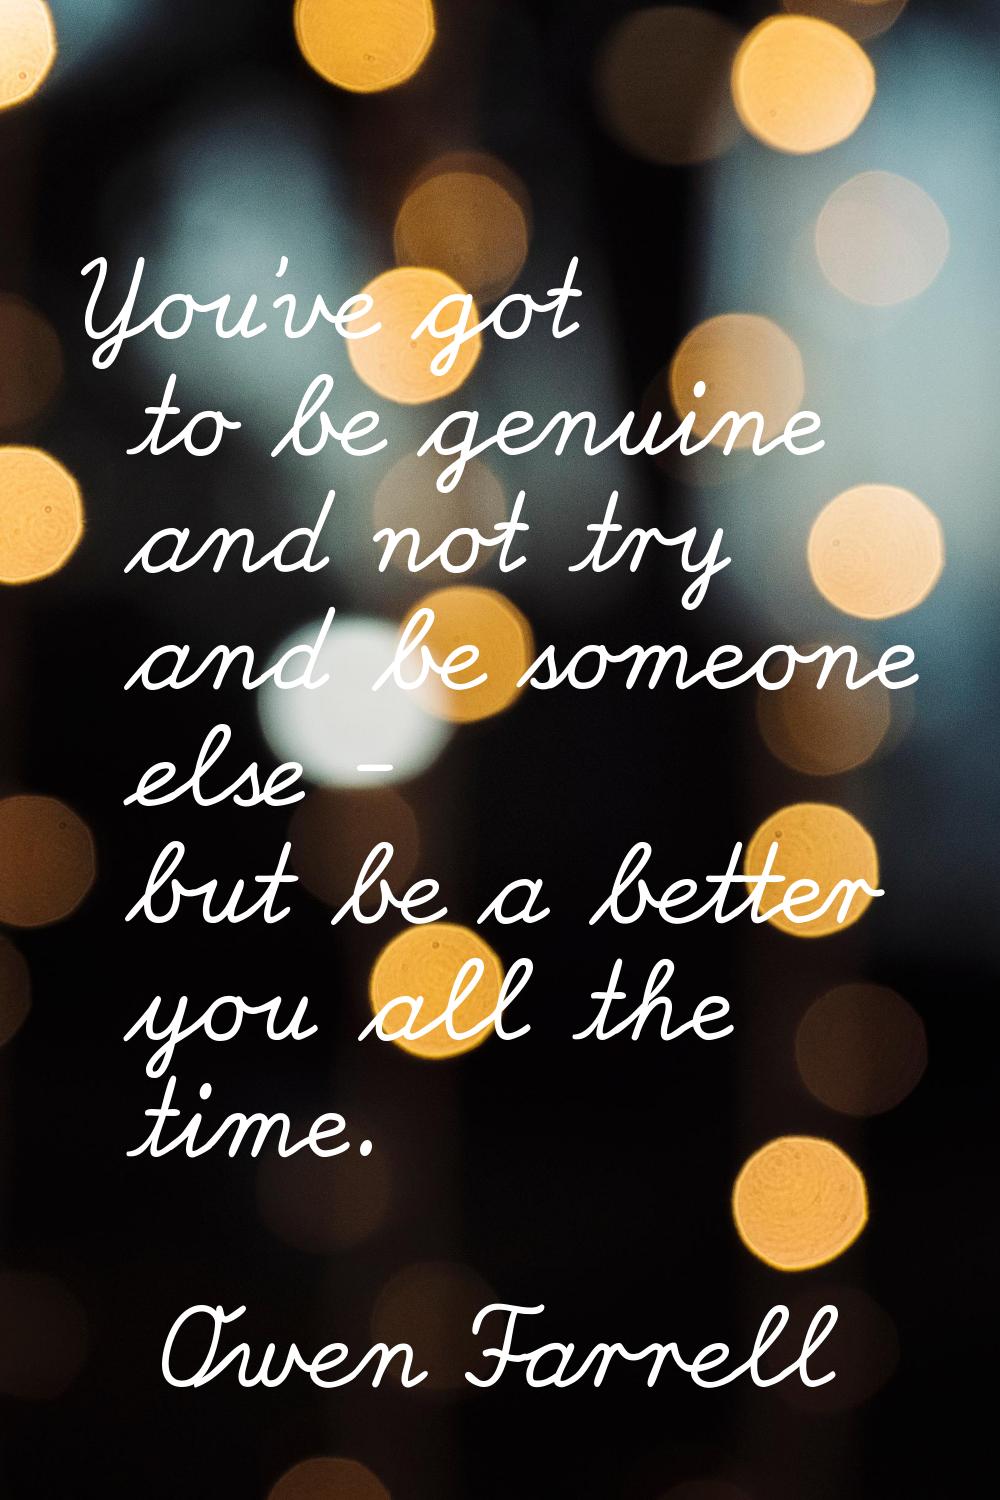 You've got to be genuine and not try and be someone else - but be a better you all the time.